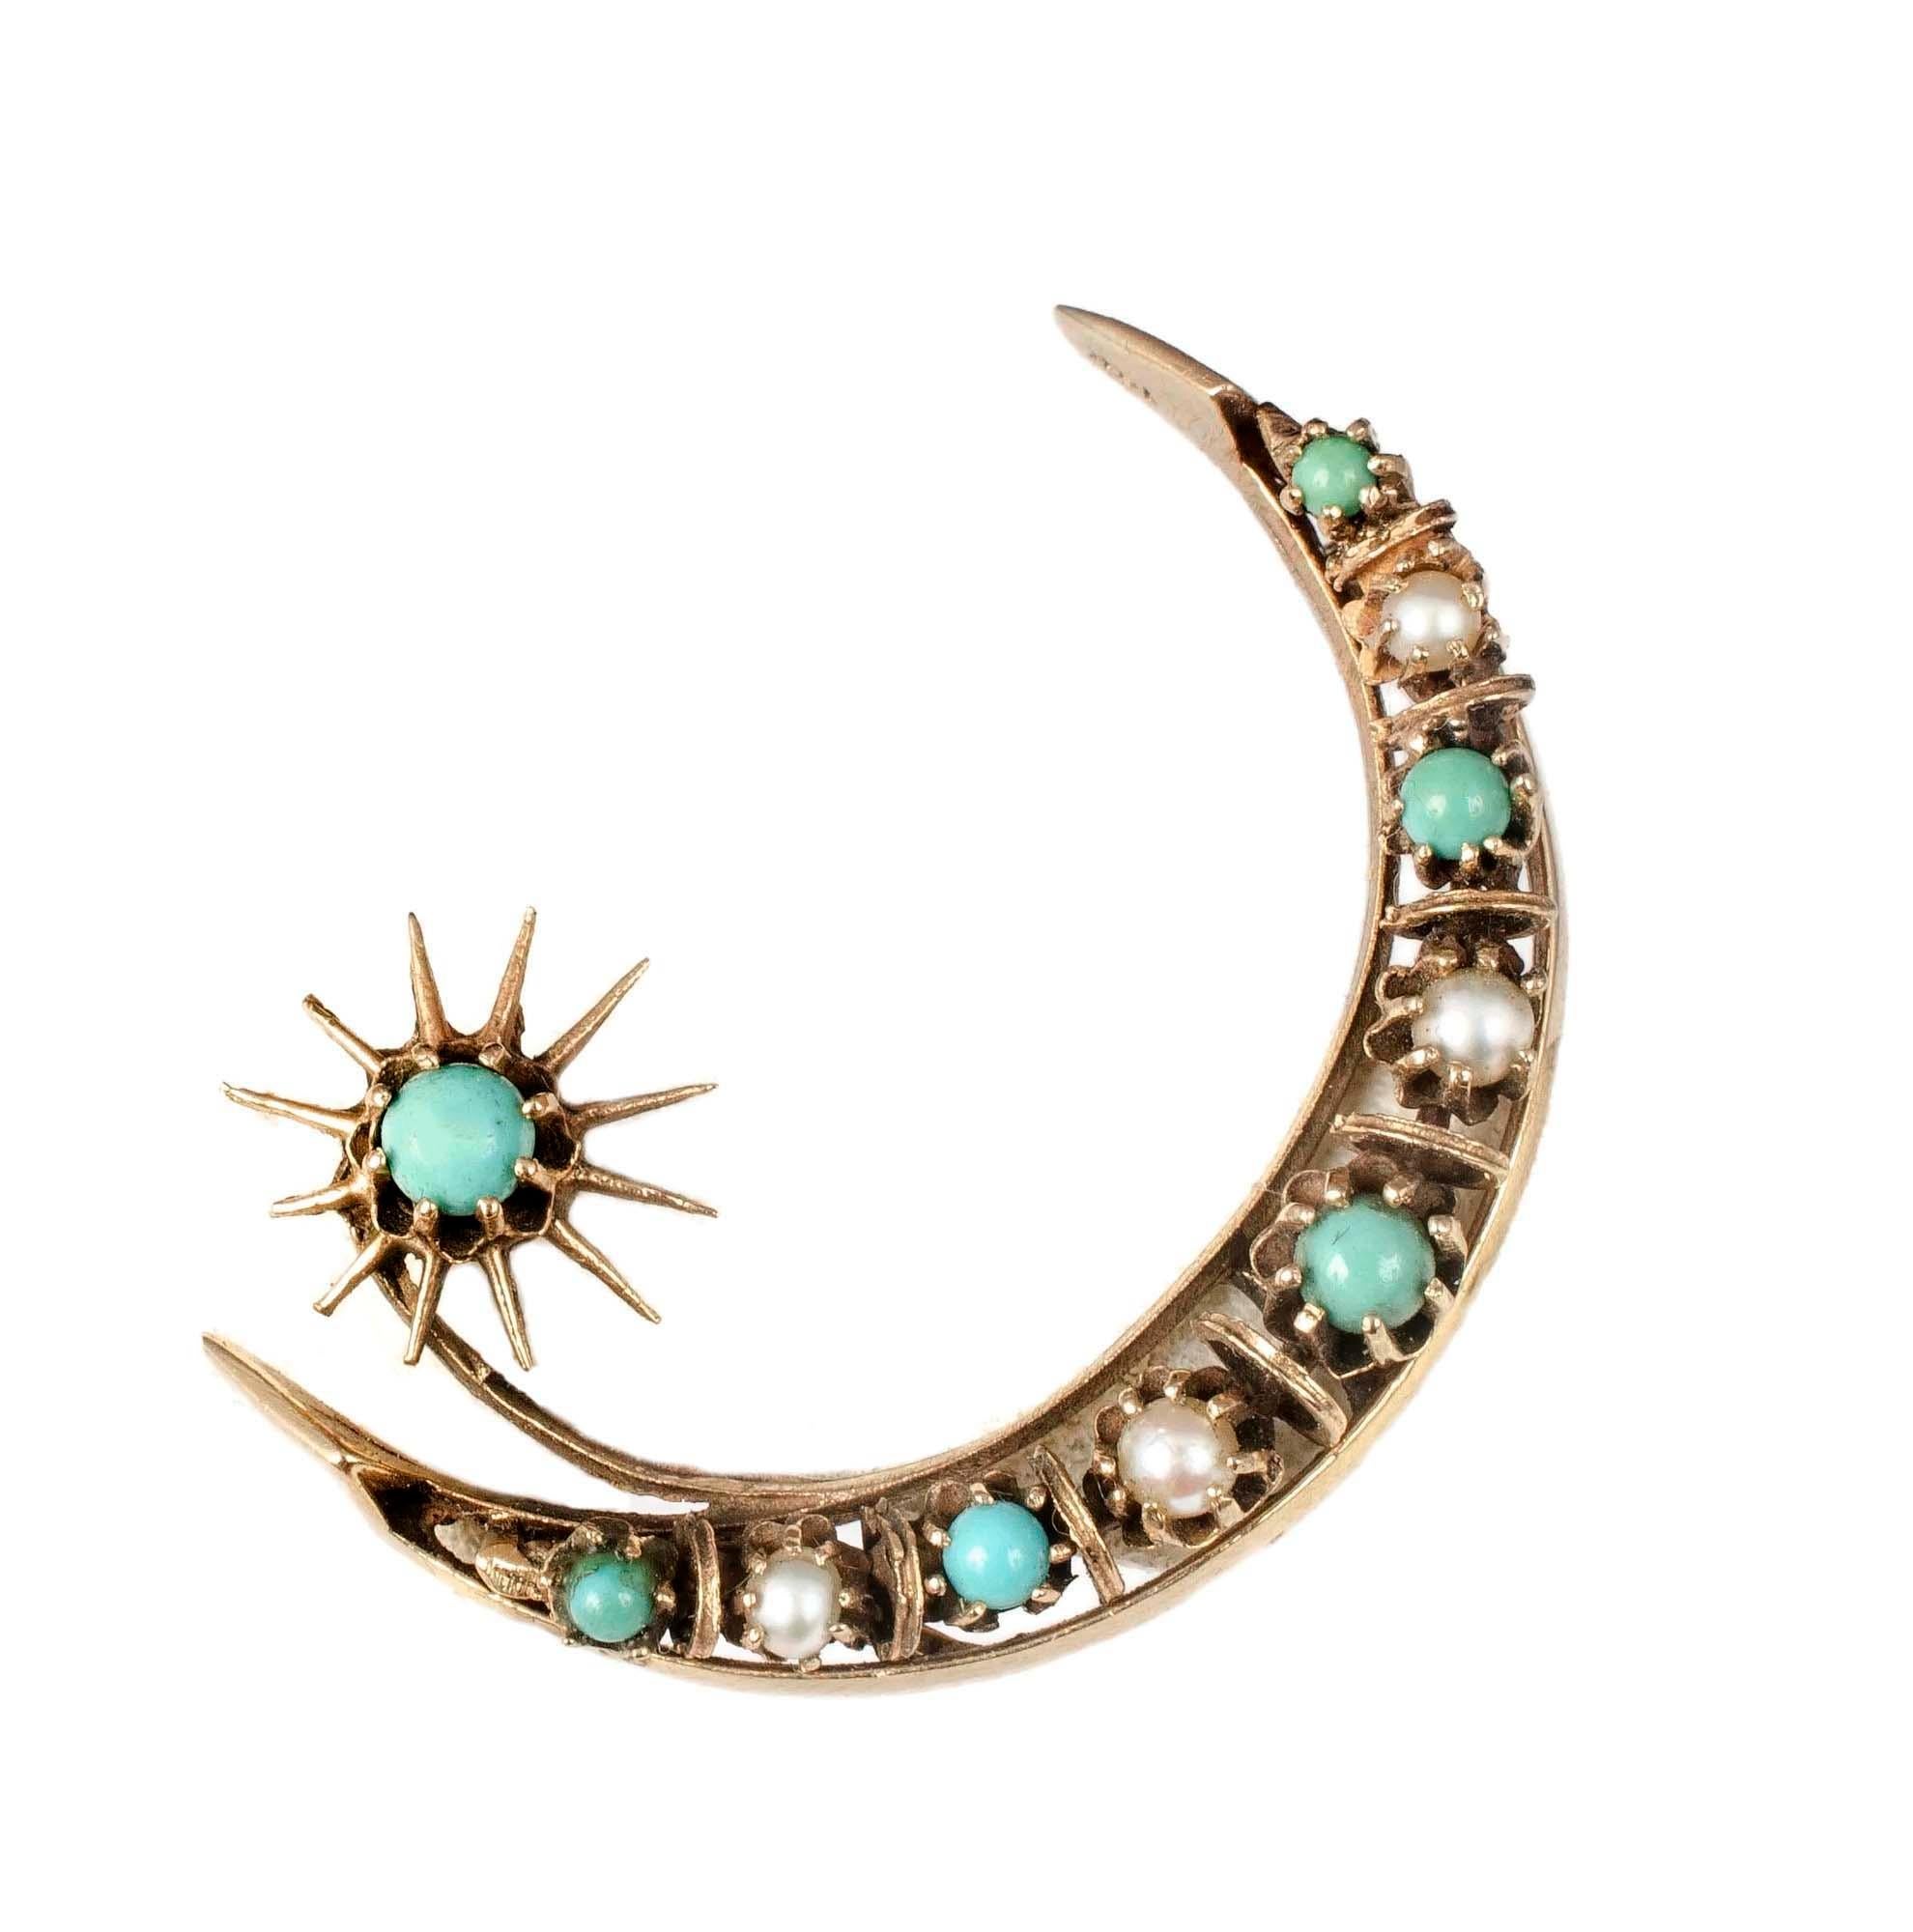 14k Gold Seed, Pearls, Turquoise Victorian Revival Crescent Moon Star Pin Brooch In Excellent Condition For Sale In Binghamton, NY